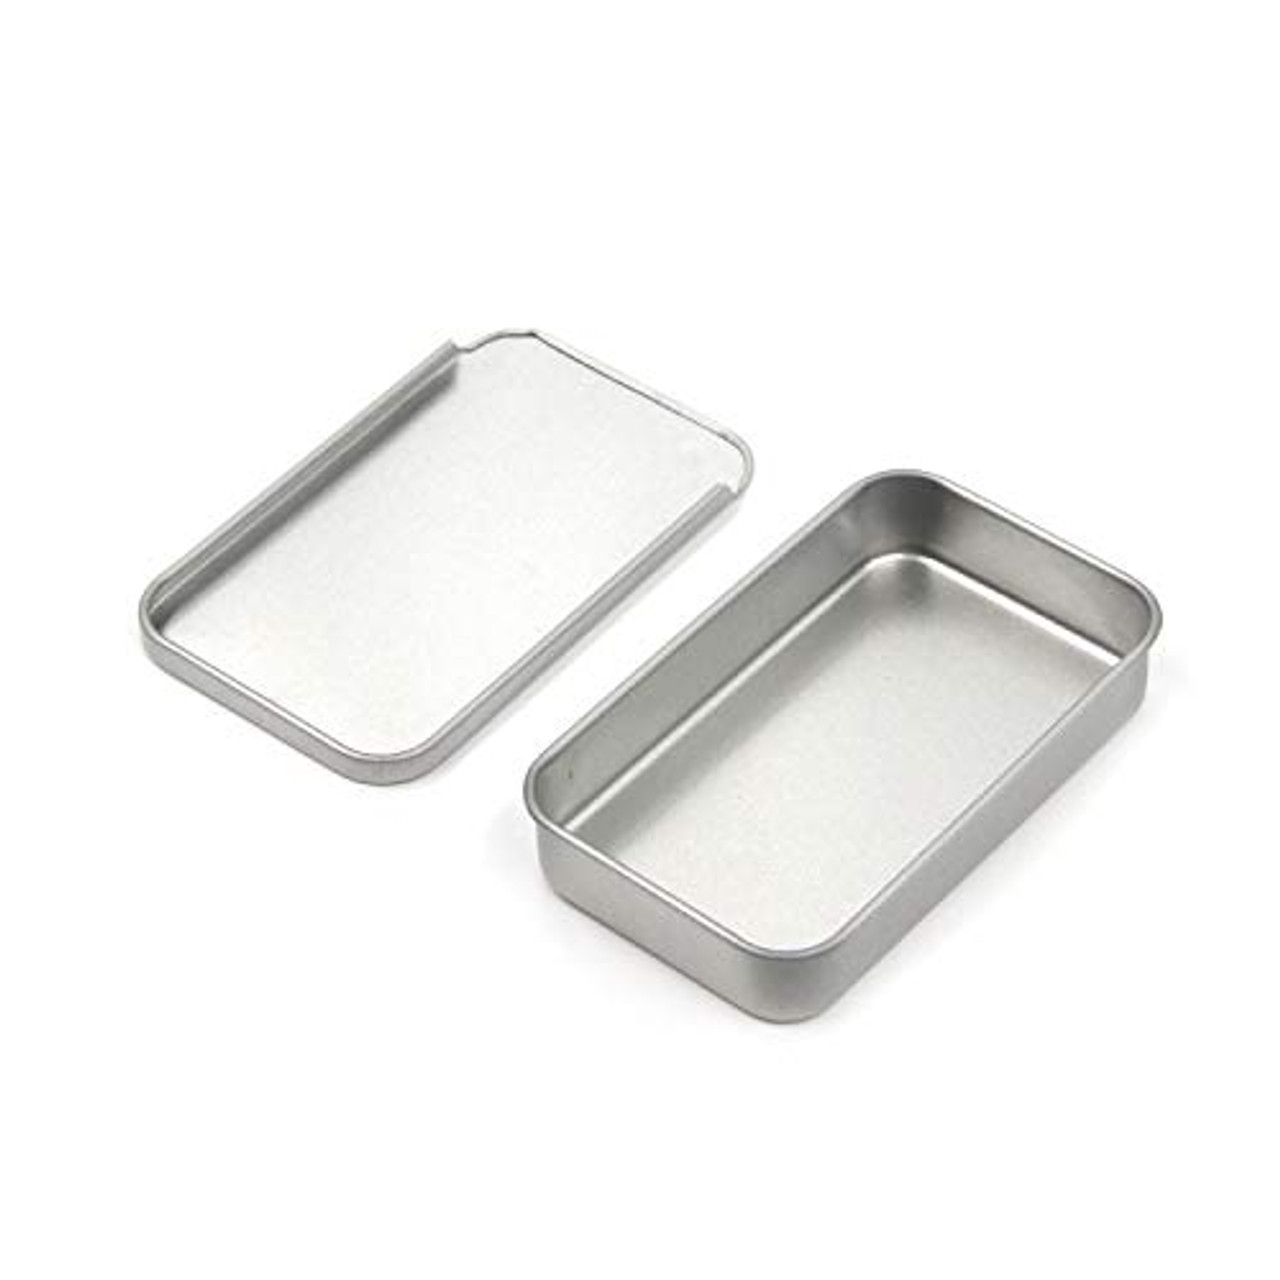 1/2 Oz 0.5 Oz Round Metal Tin Containers for Lip  Balm,crafts,storage,survival 